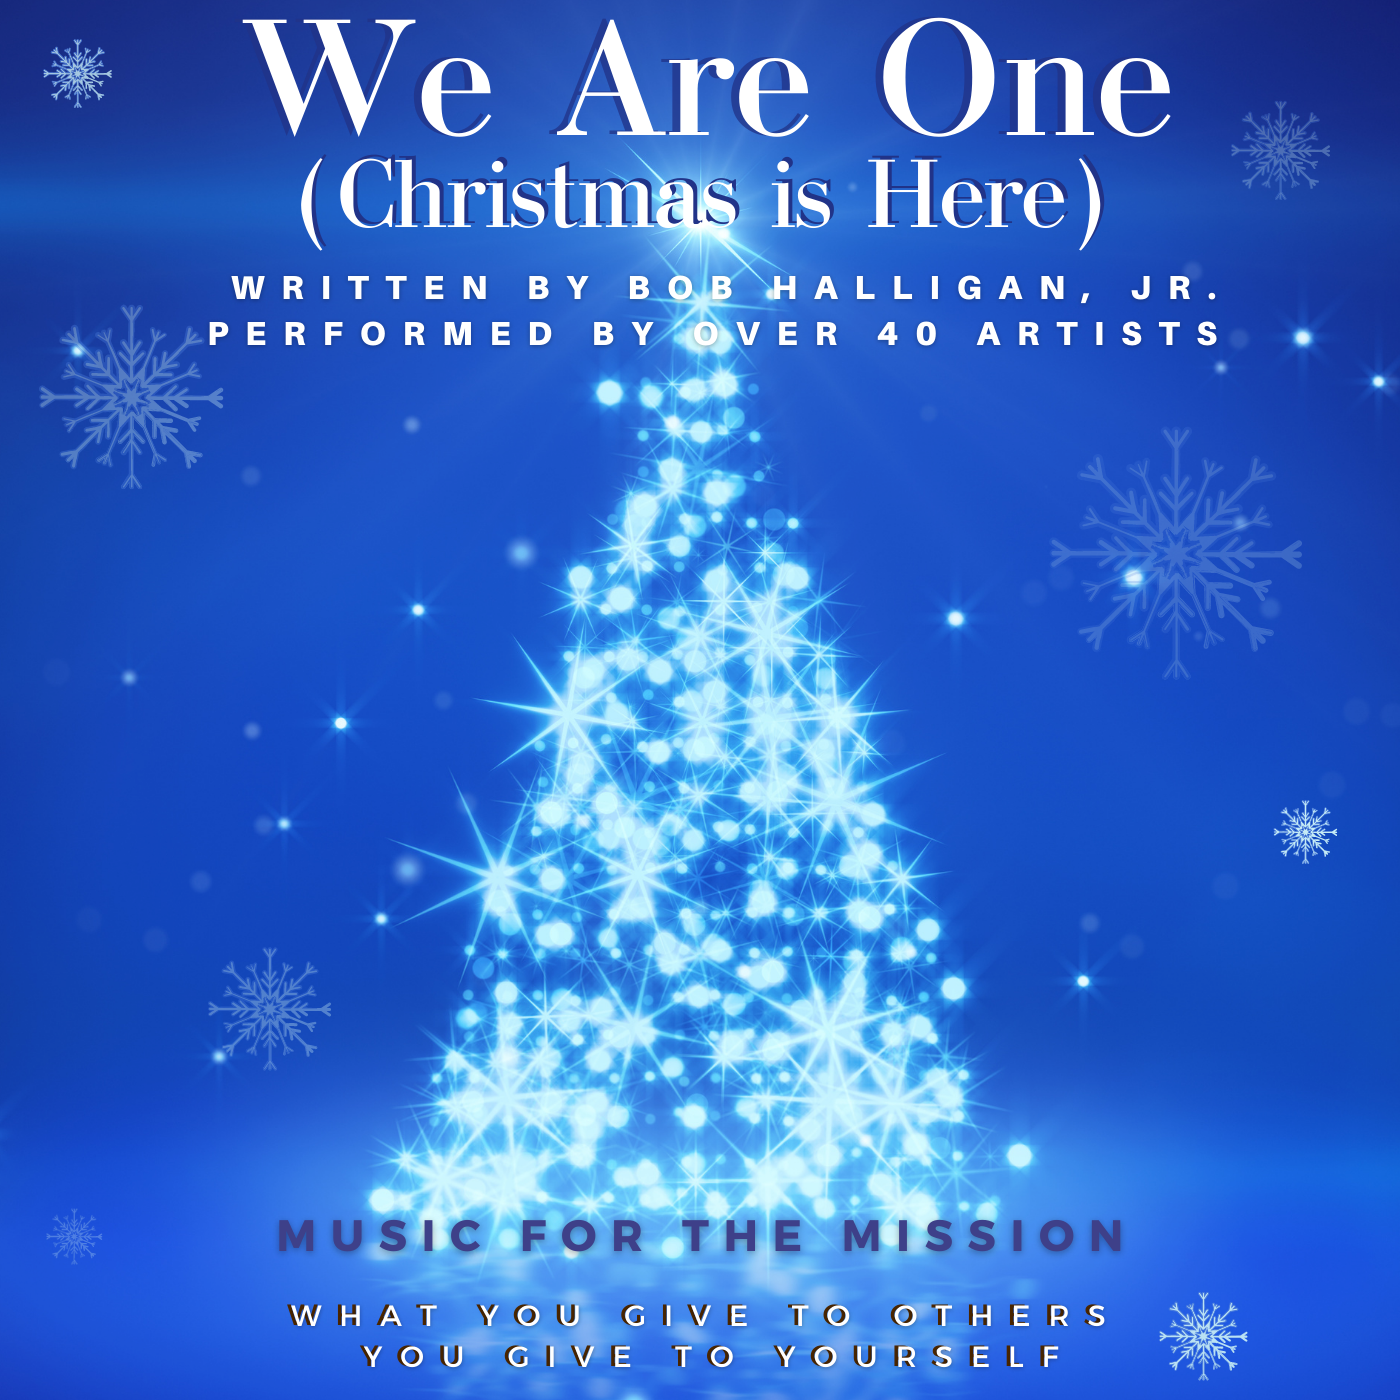 We Are One (Christmas is Here)